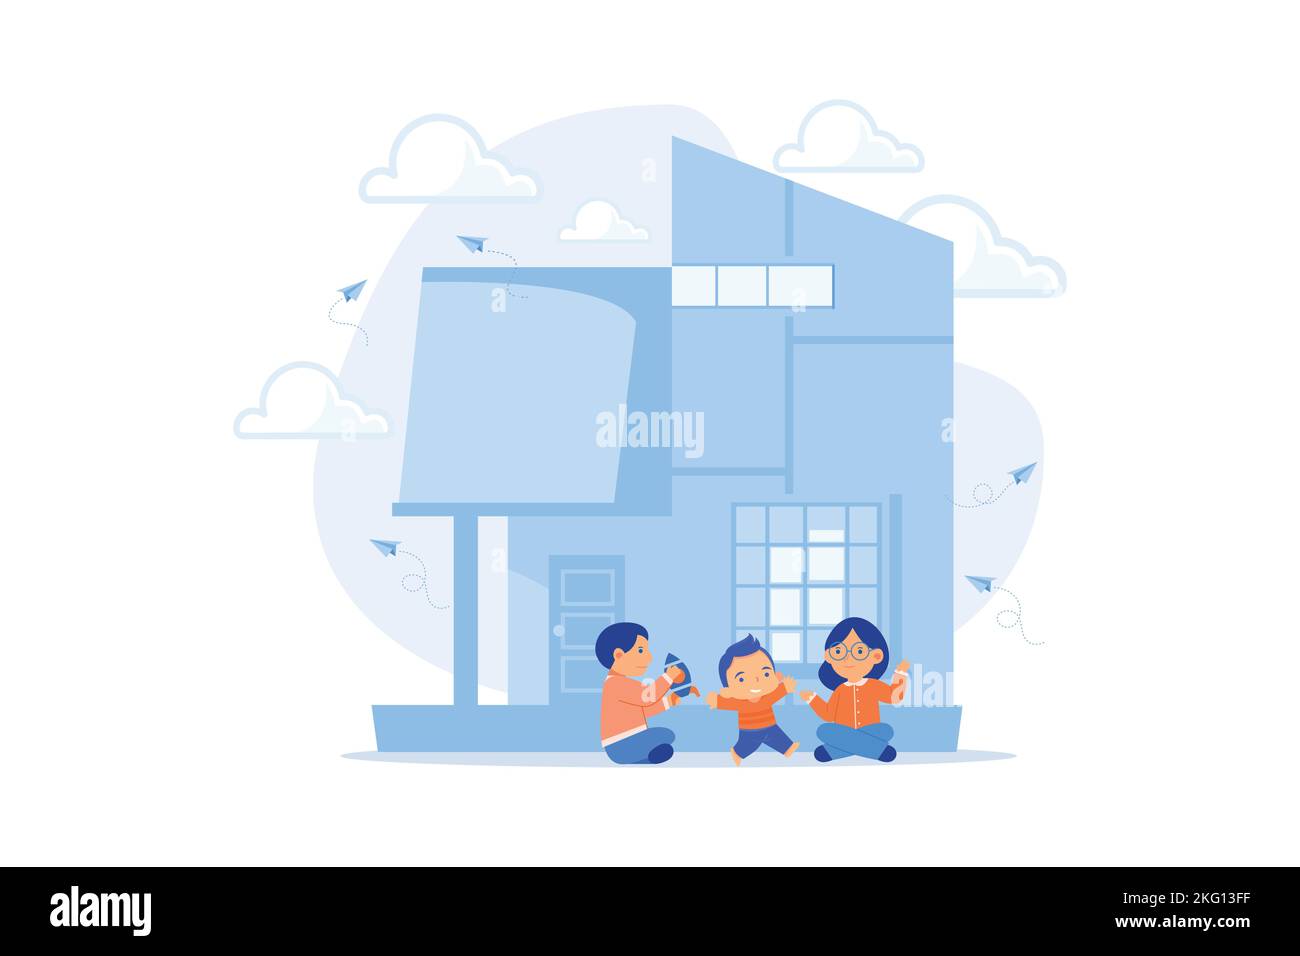 Children play in center giving information about treatment of ASD. Autism center, treatment of autism spectrum disorder, kids autism help concept. fla Stock Vector